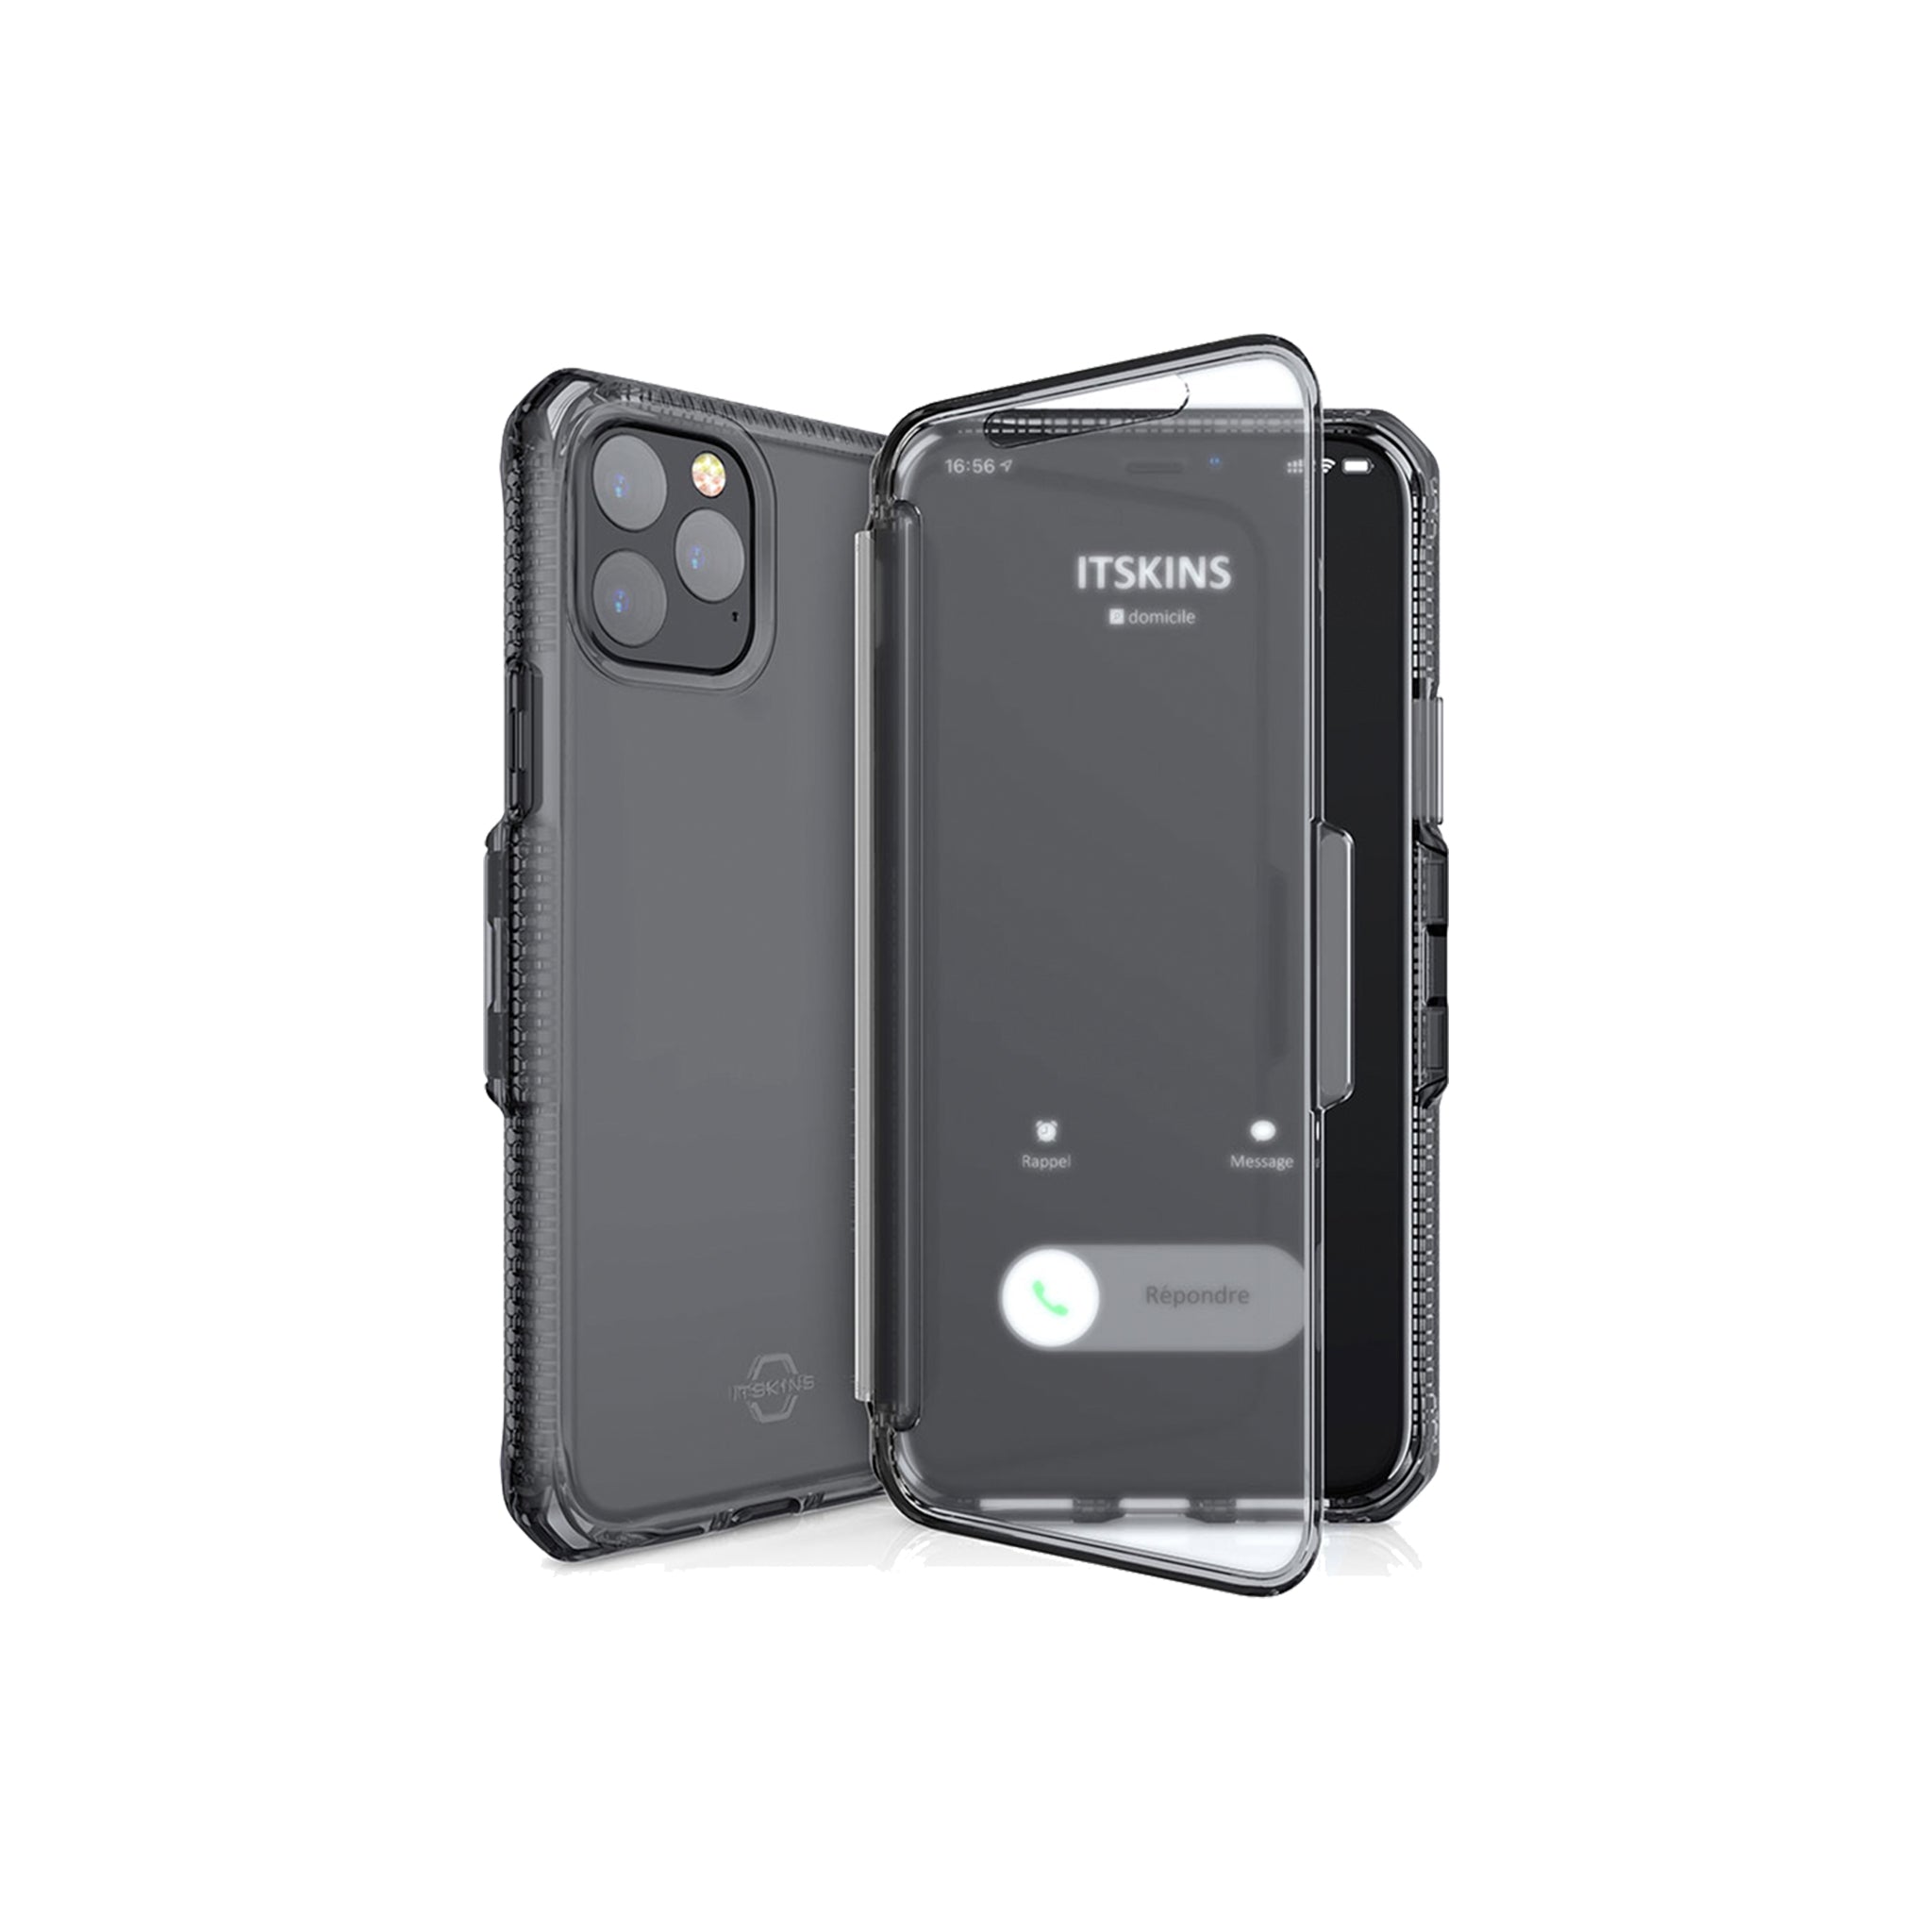 Itskins - Spectrum Vision Clear Case For Apple Iphone 11 Pro Max - Smoke